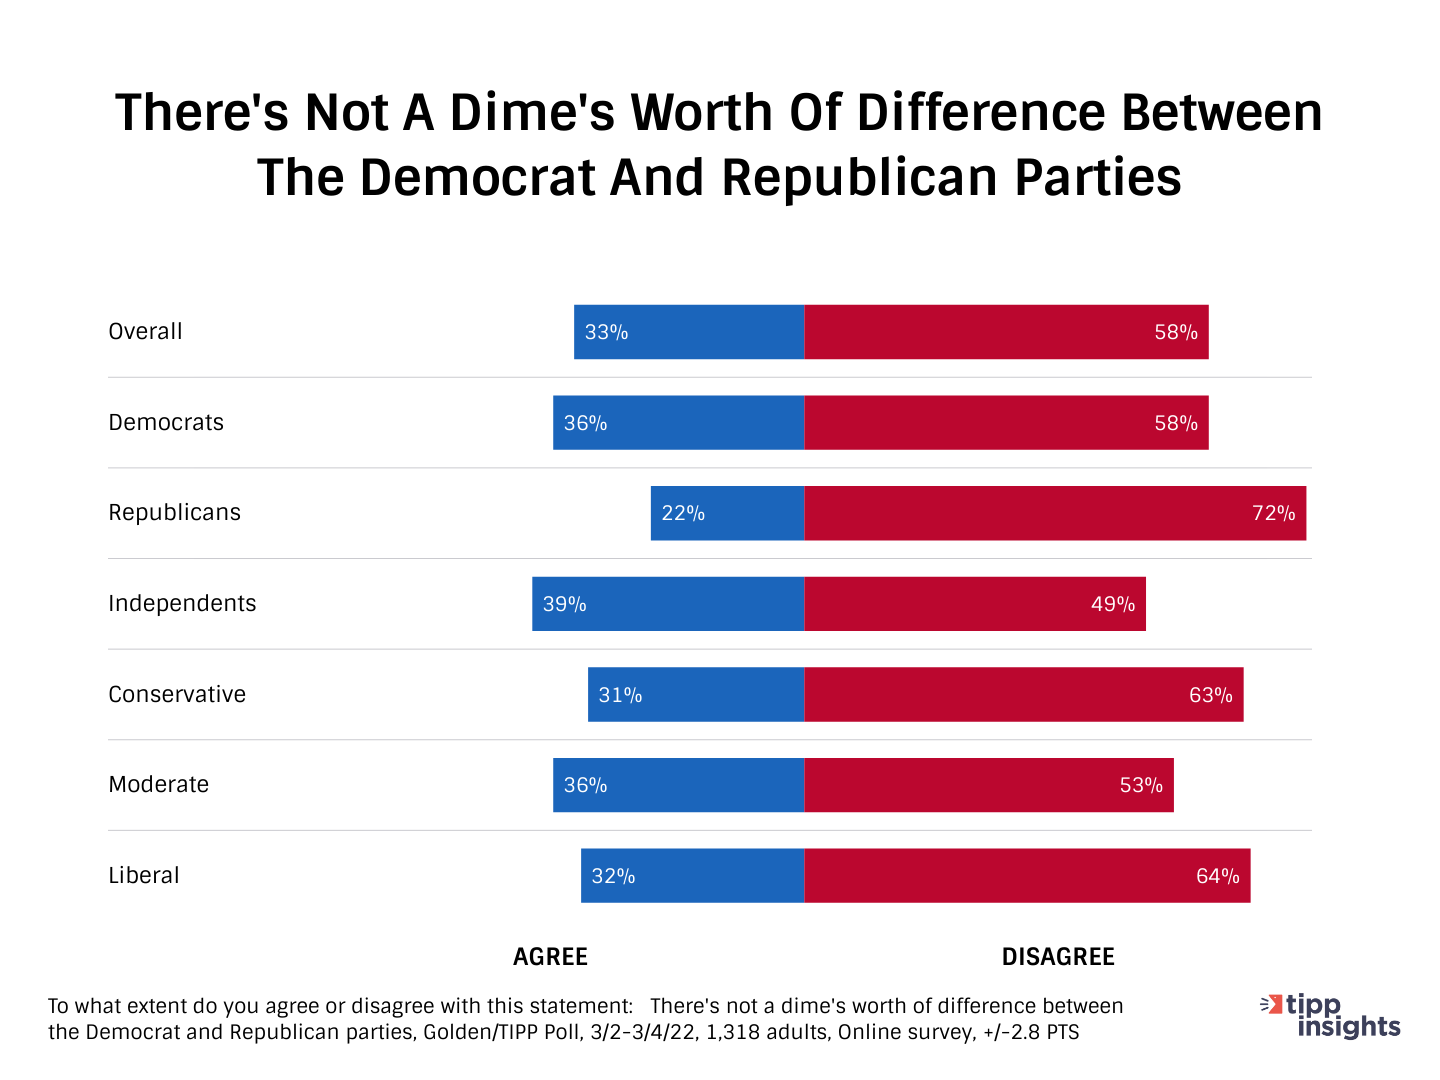 Perception of the two parties